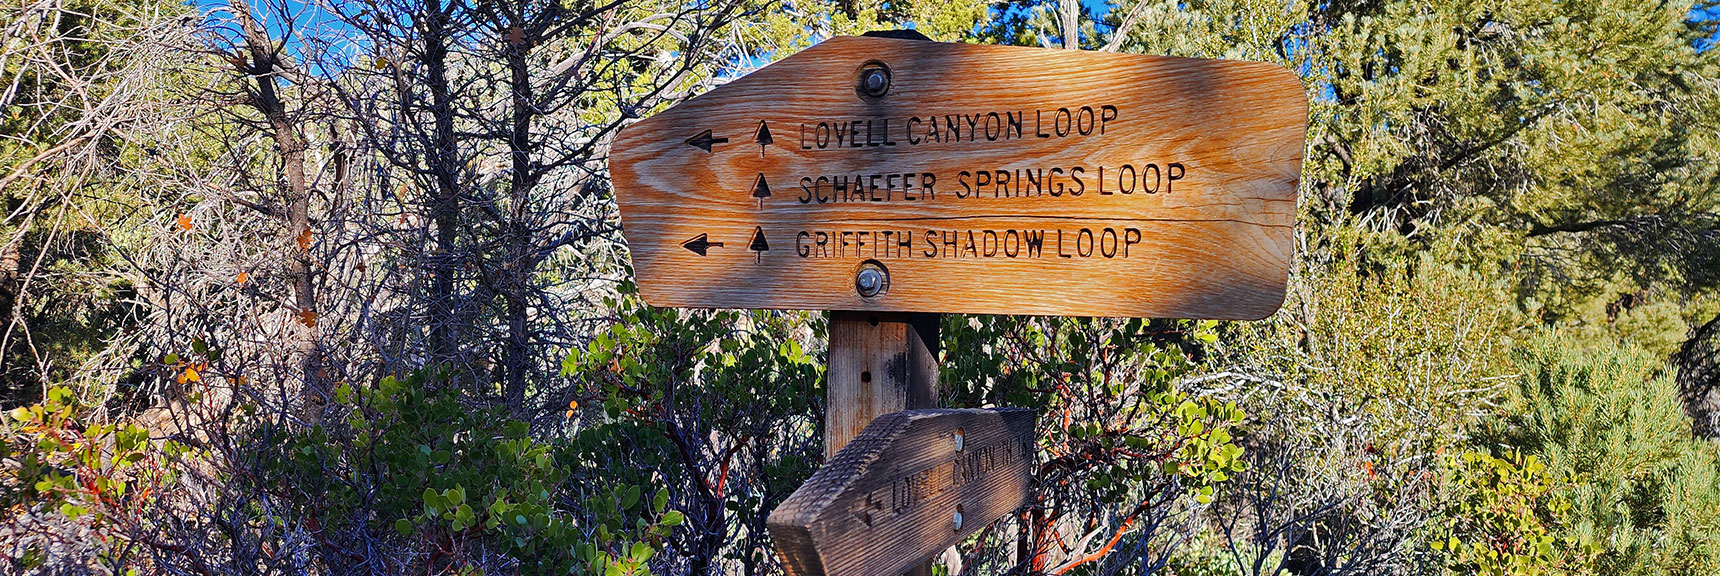 Choices at First Main Trail Division. Head Left for Clockwise Circuit of Loop. | Griffith Shadow Loop | Lovell Canyon, Nevada